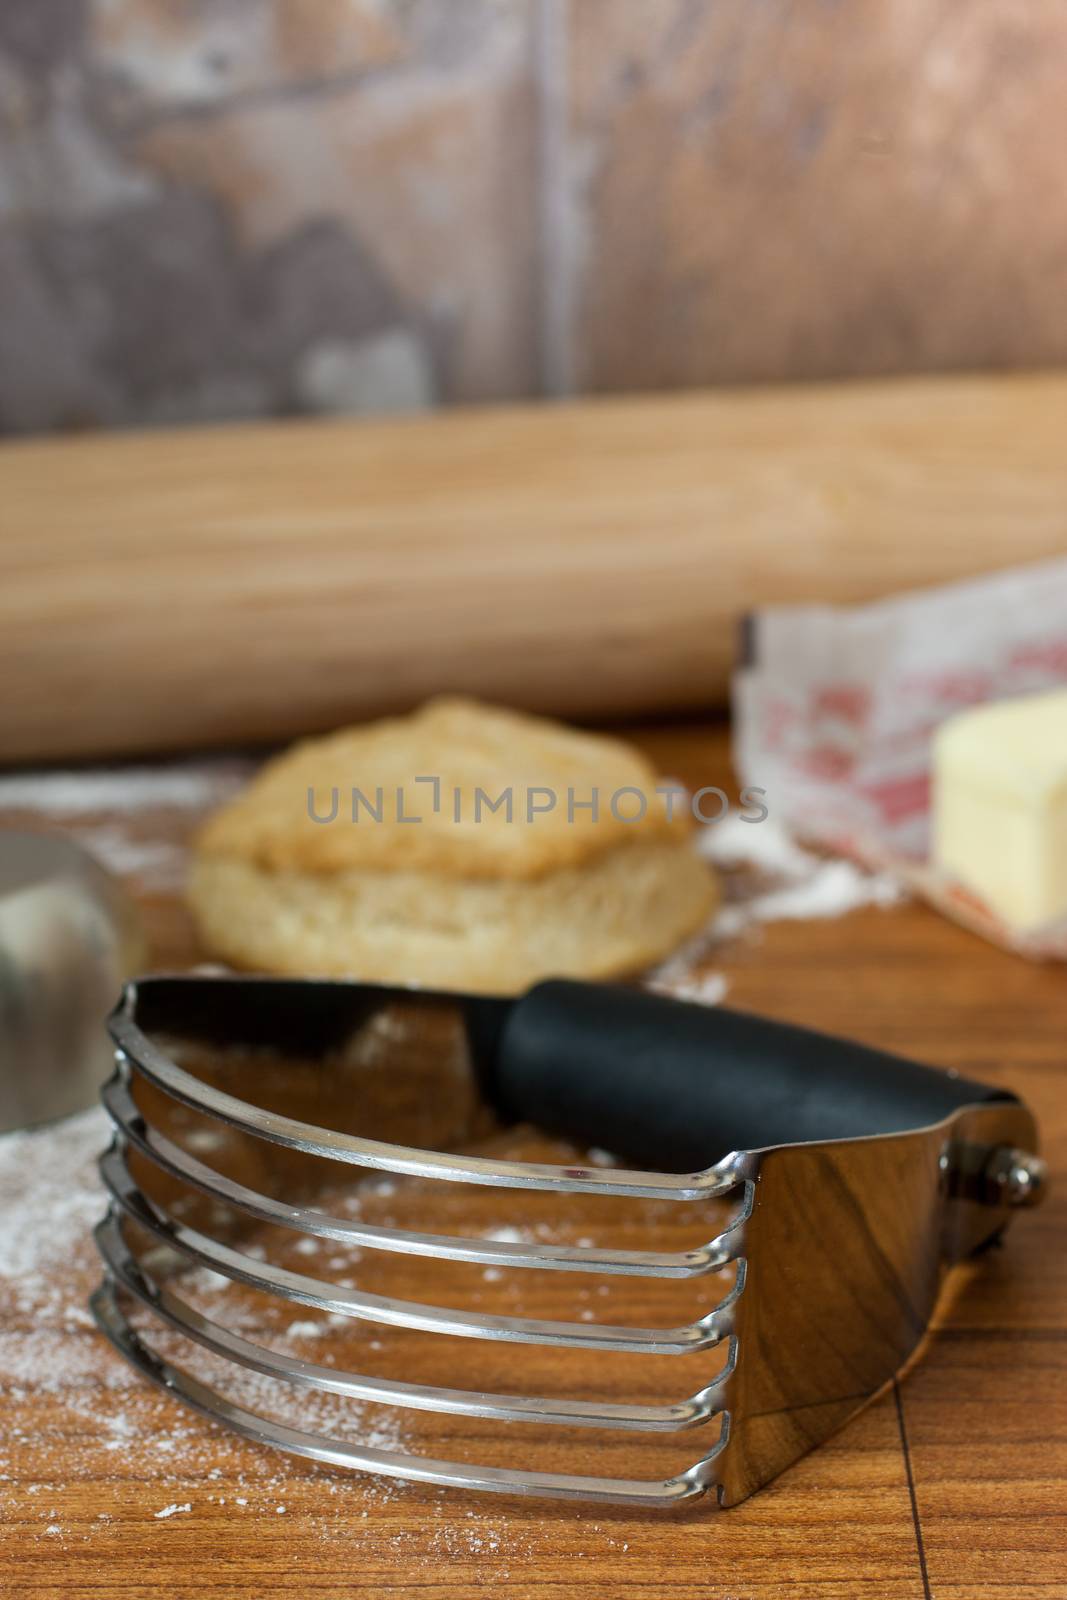 A chrome pastry cutter sits on a counter top with rolling pin, butter, flour, and a biscuit on the background.